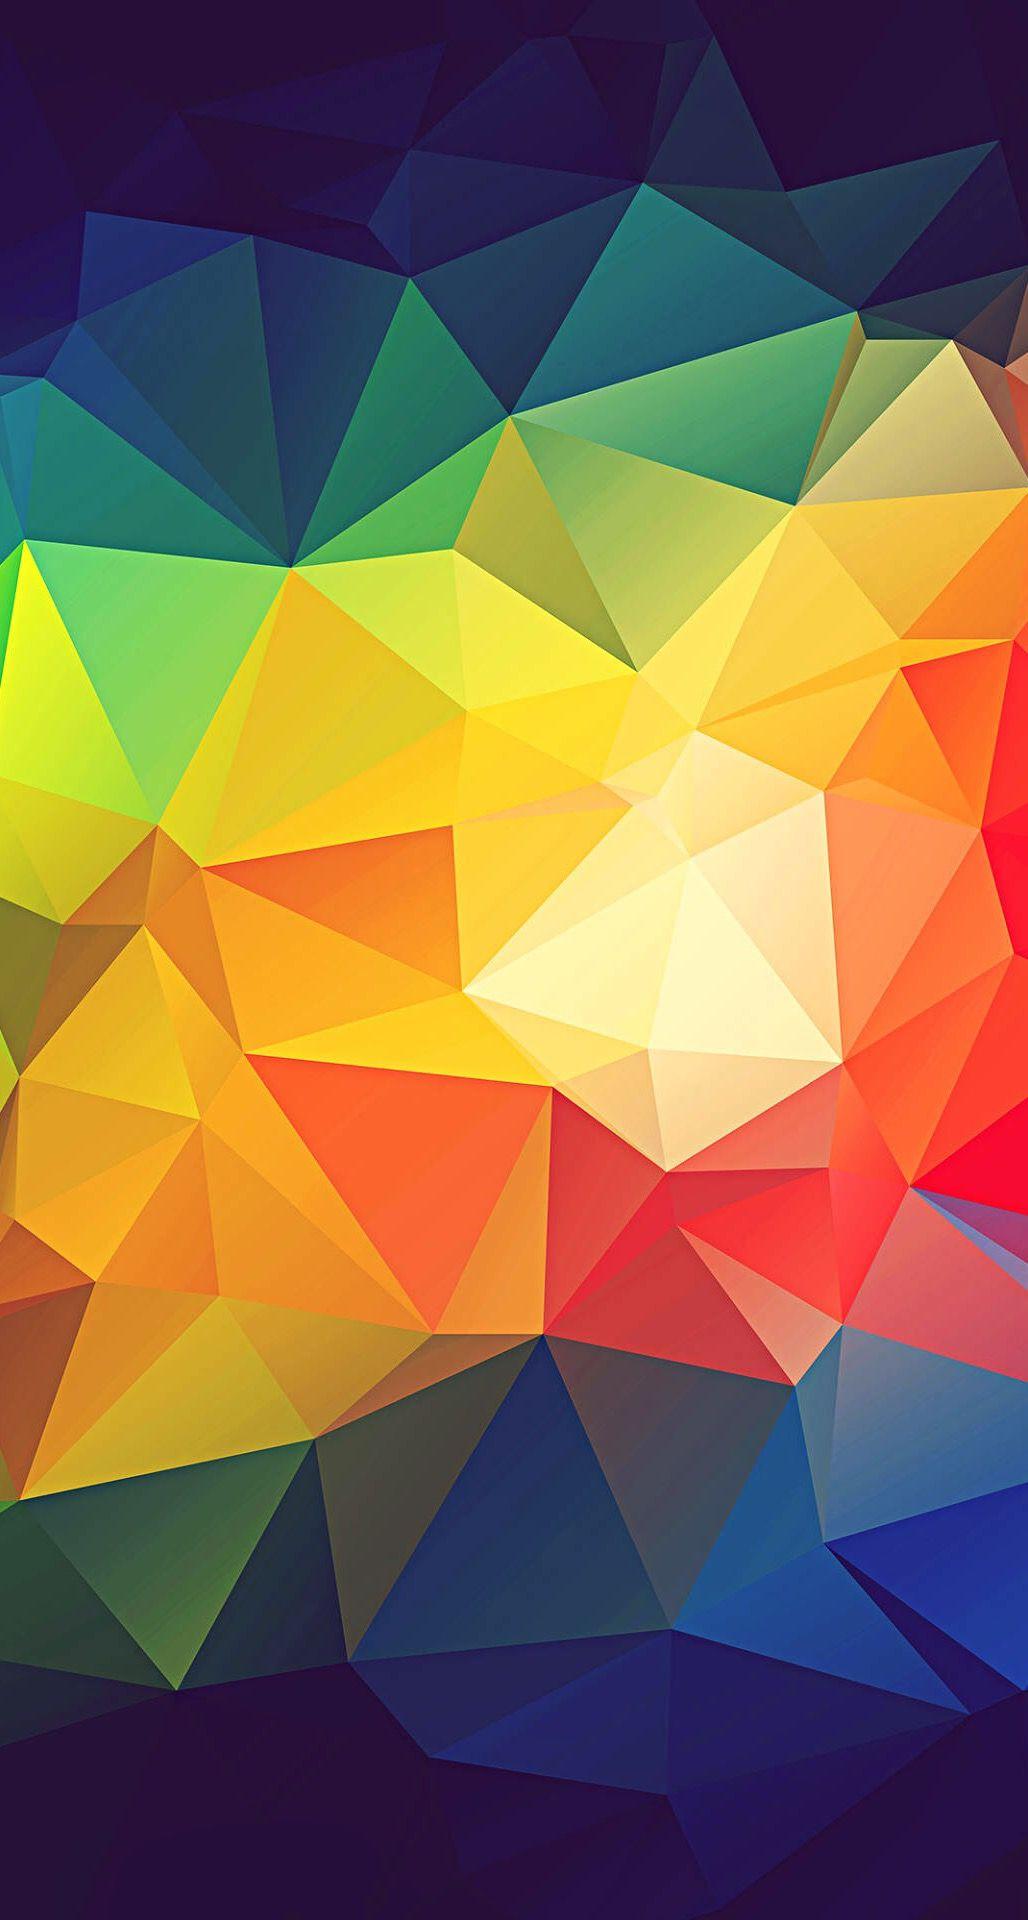 Colorful Triangles Wallpaper Free Colorful Triangles